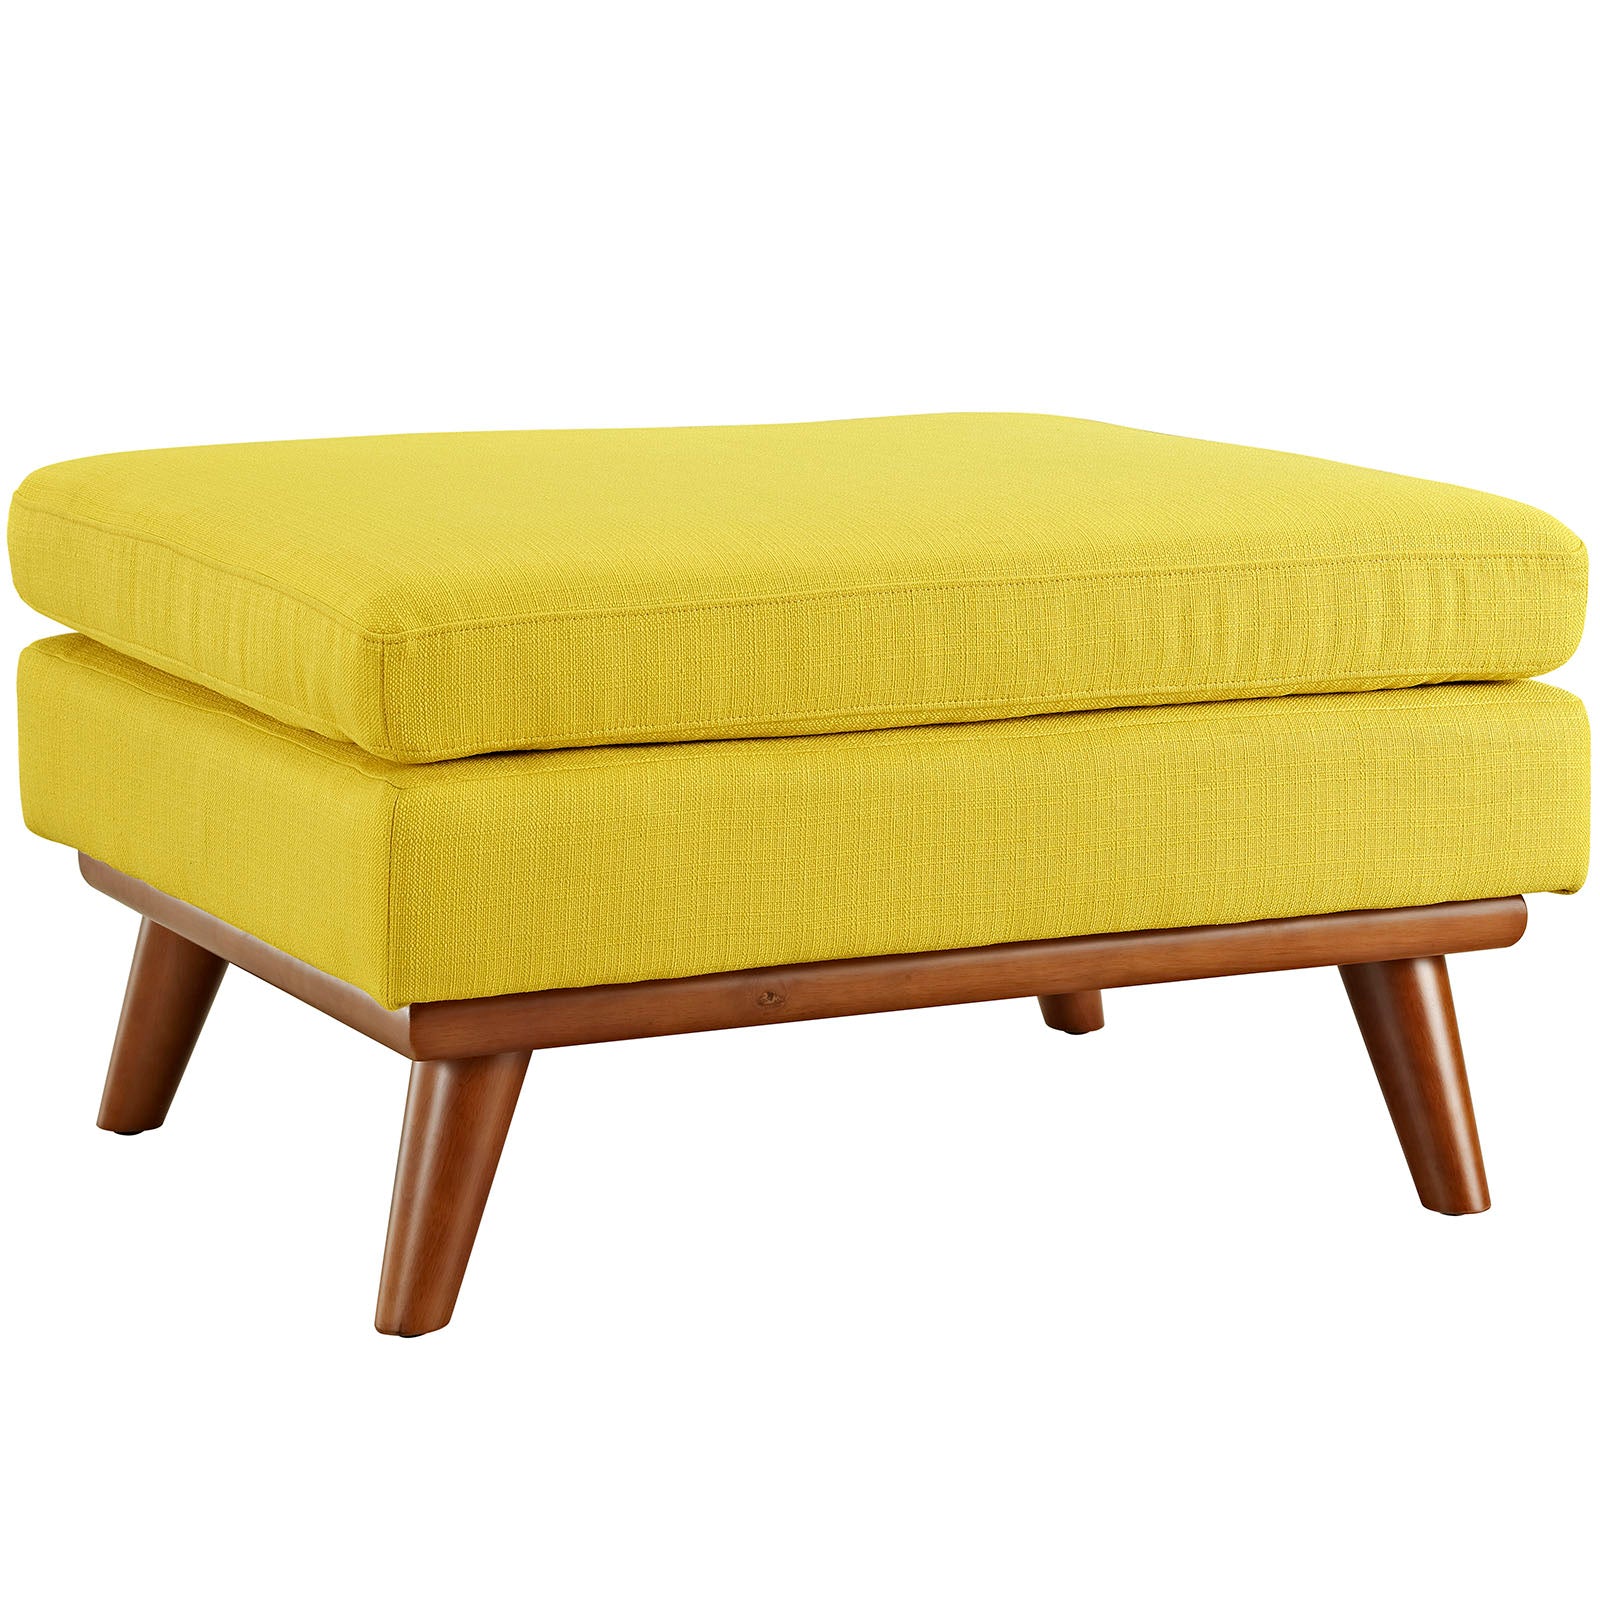 Modway Ottomans & Stools - Engage Upholstered Fabric Ottoman Sunny